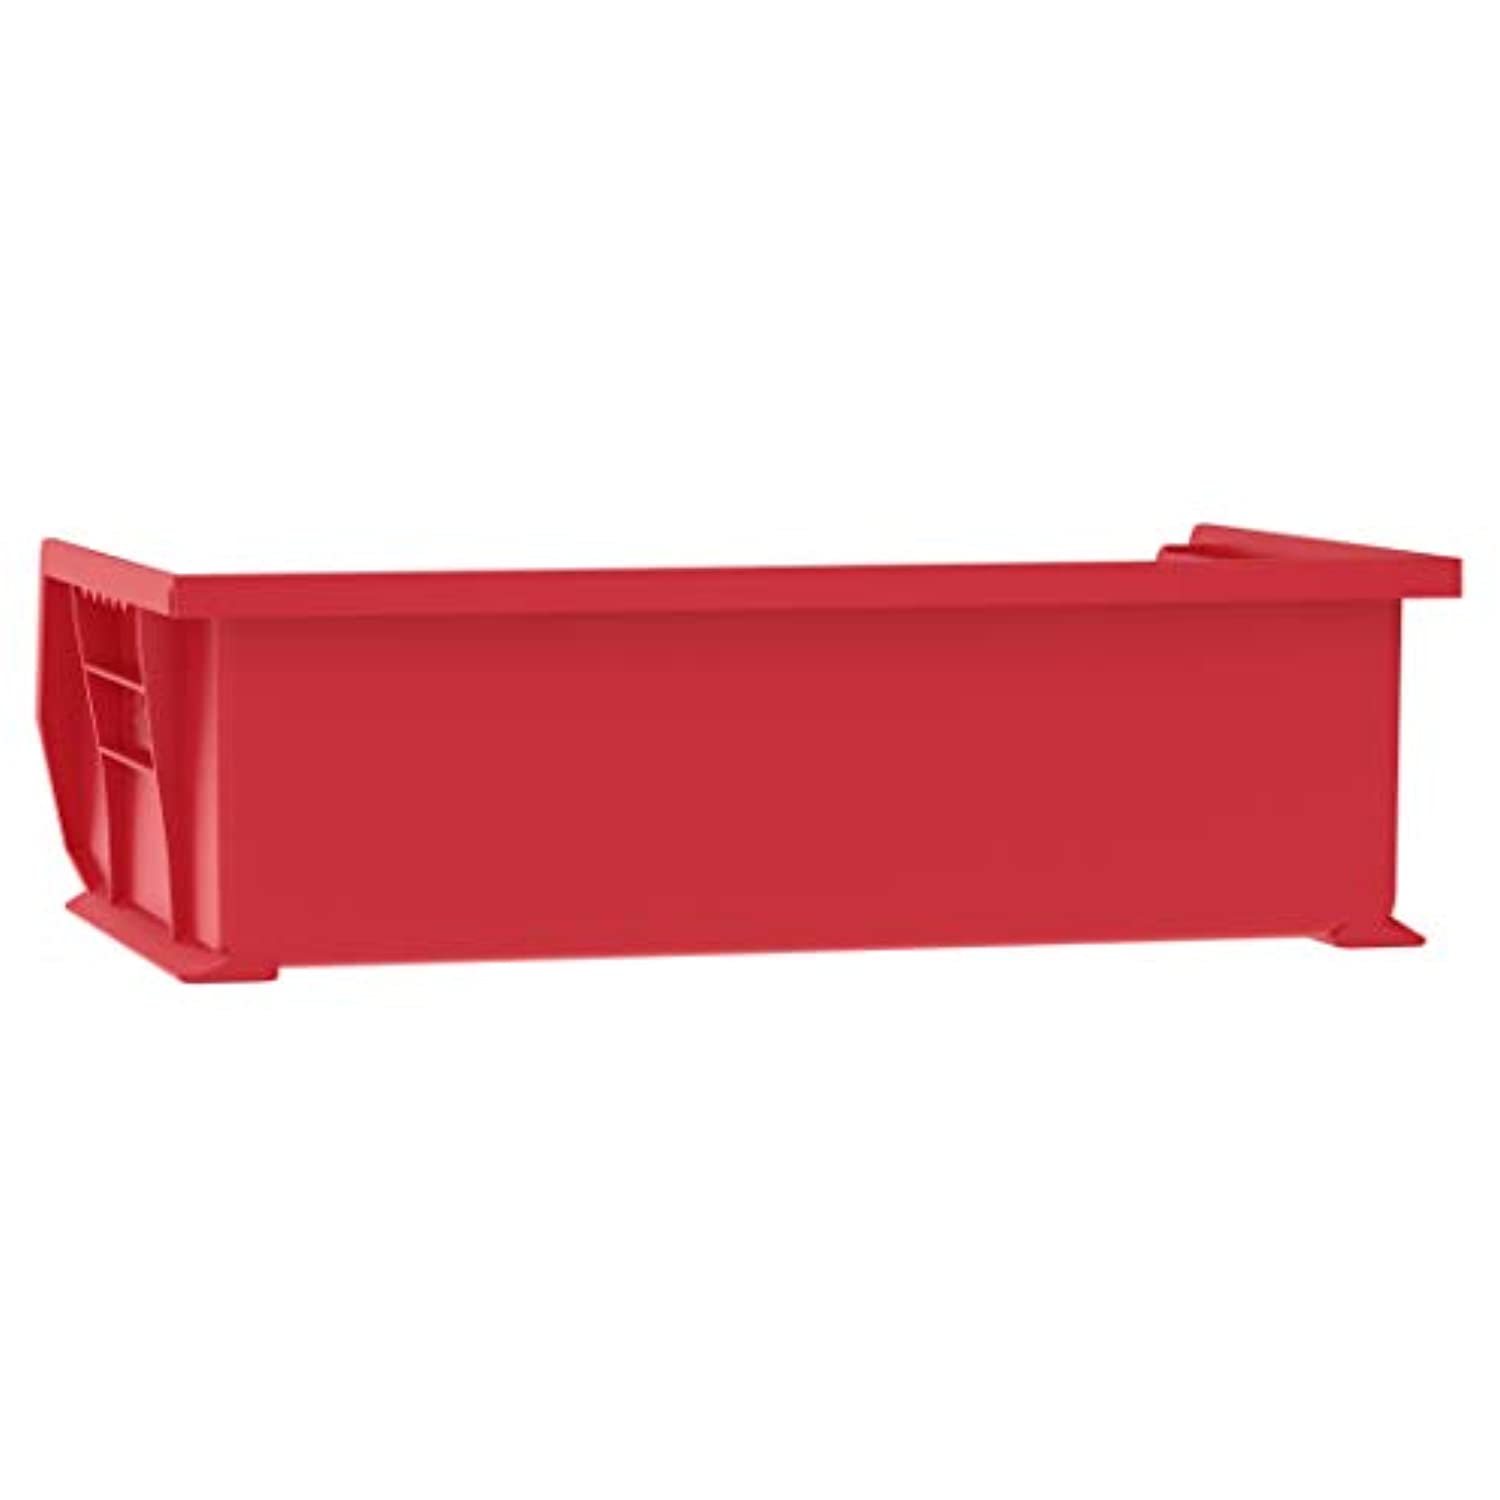 Akro-mils Hang and Stack Bin Red  Industrial Grade Polymer 30255RED - image 4 of 6